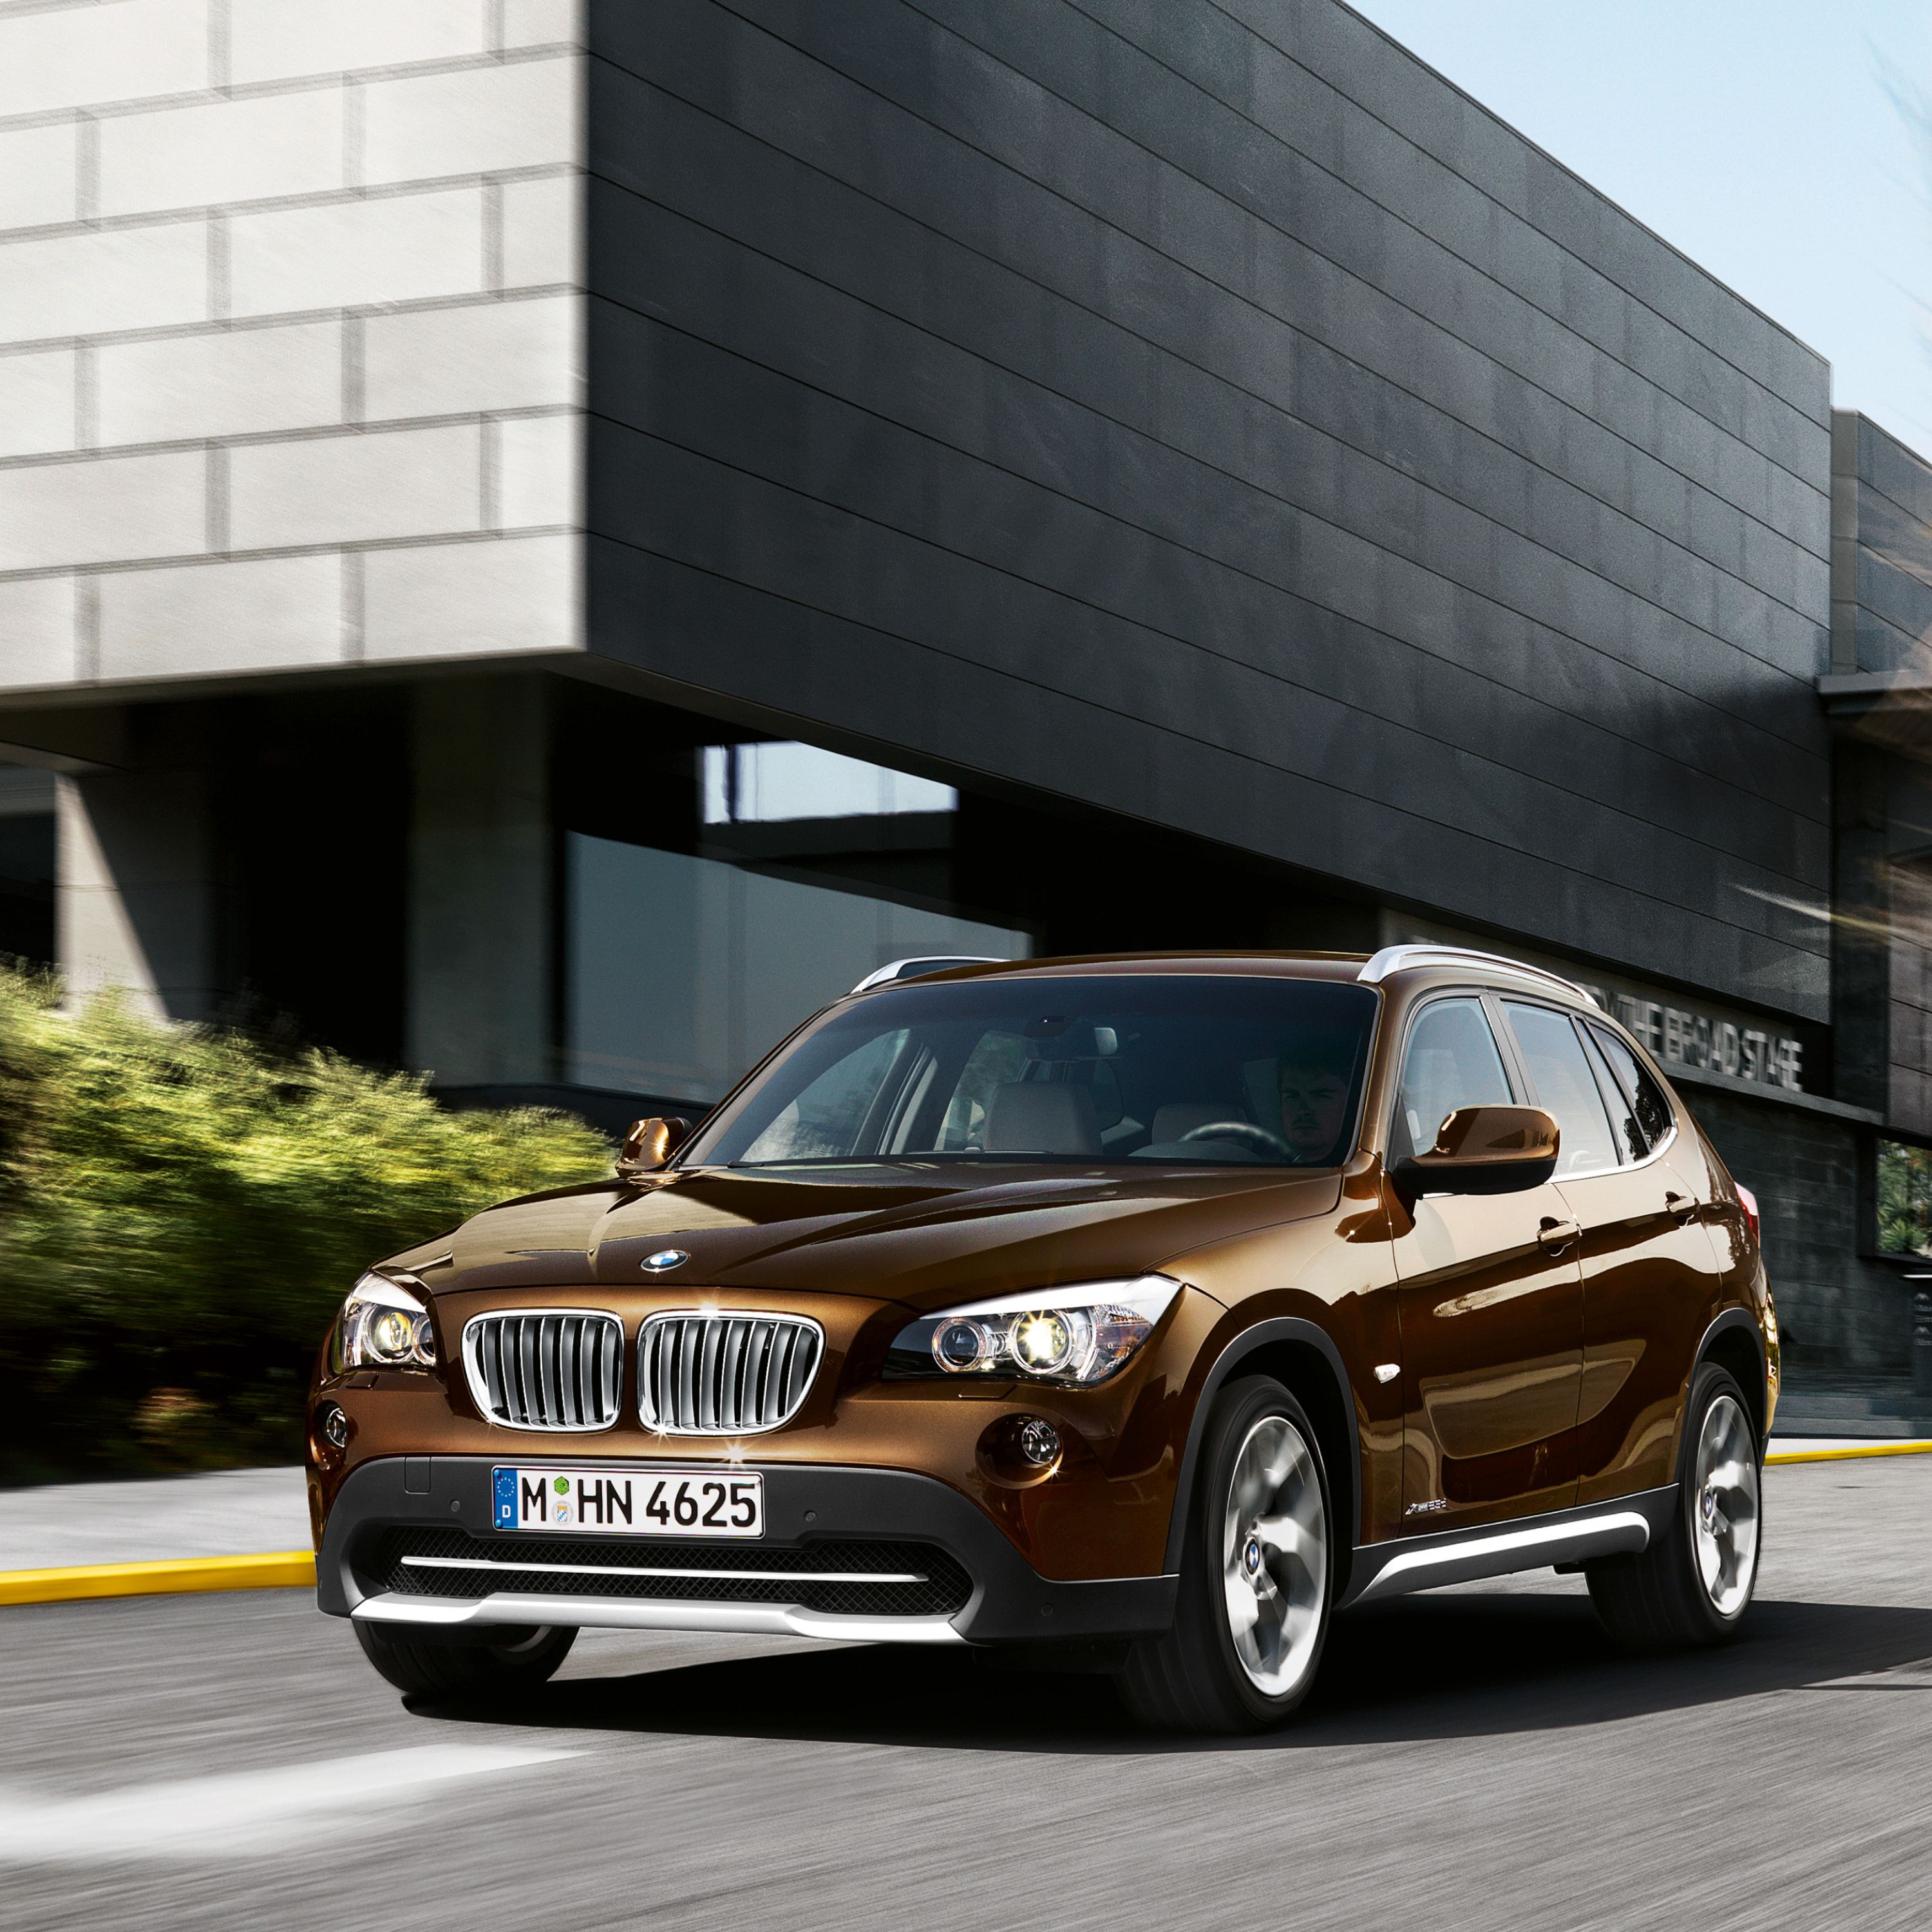 BMW X1 E84 SUV driving on a road in the center of a modern town